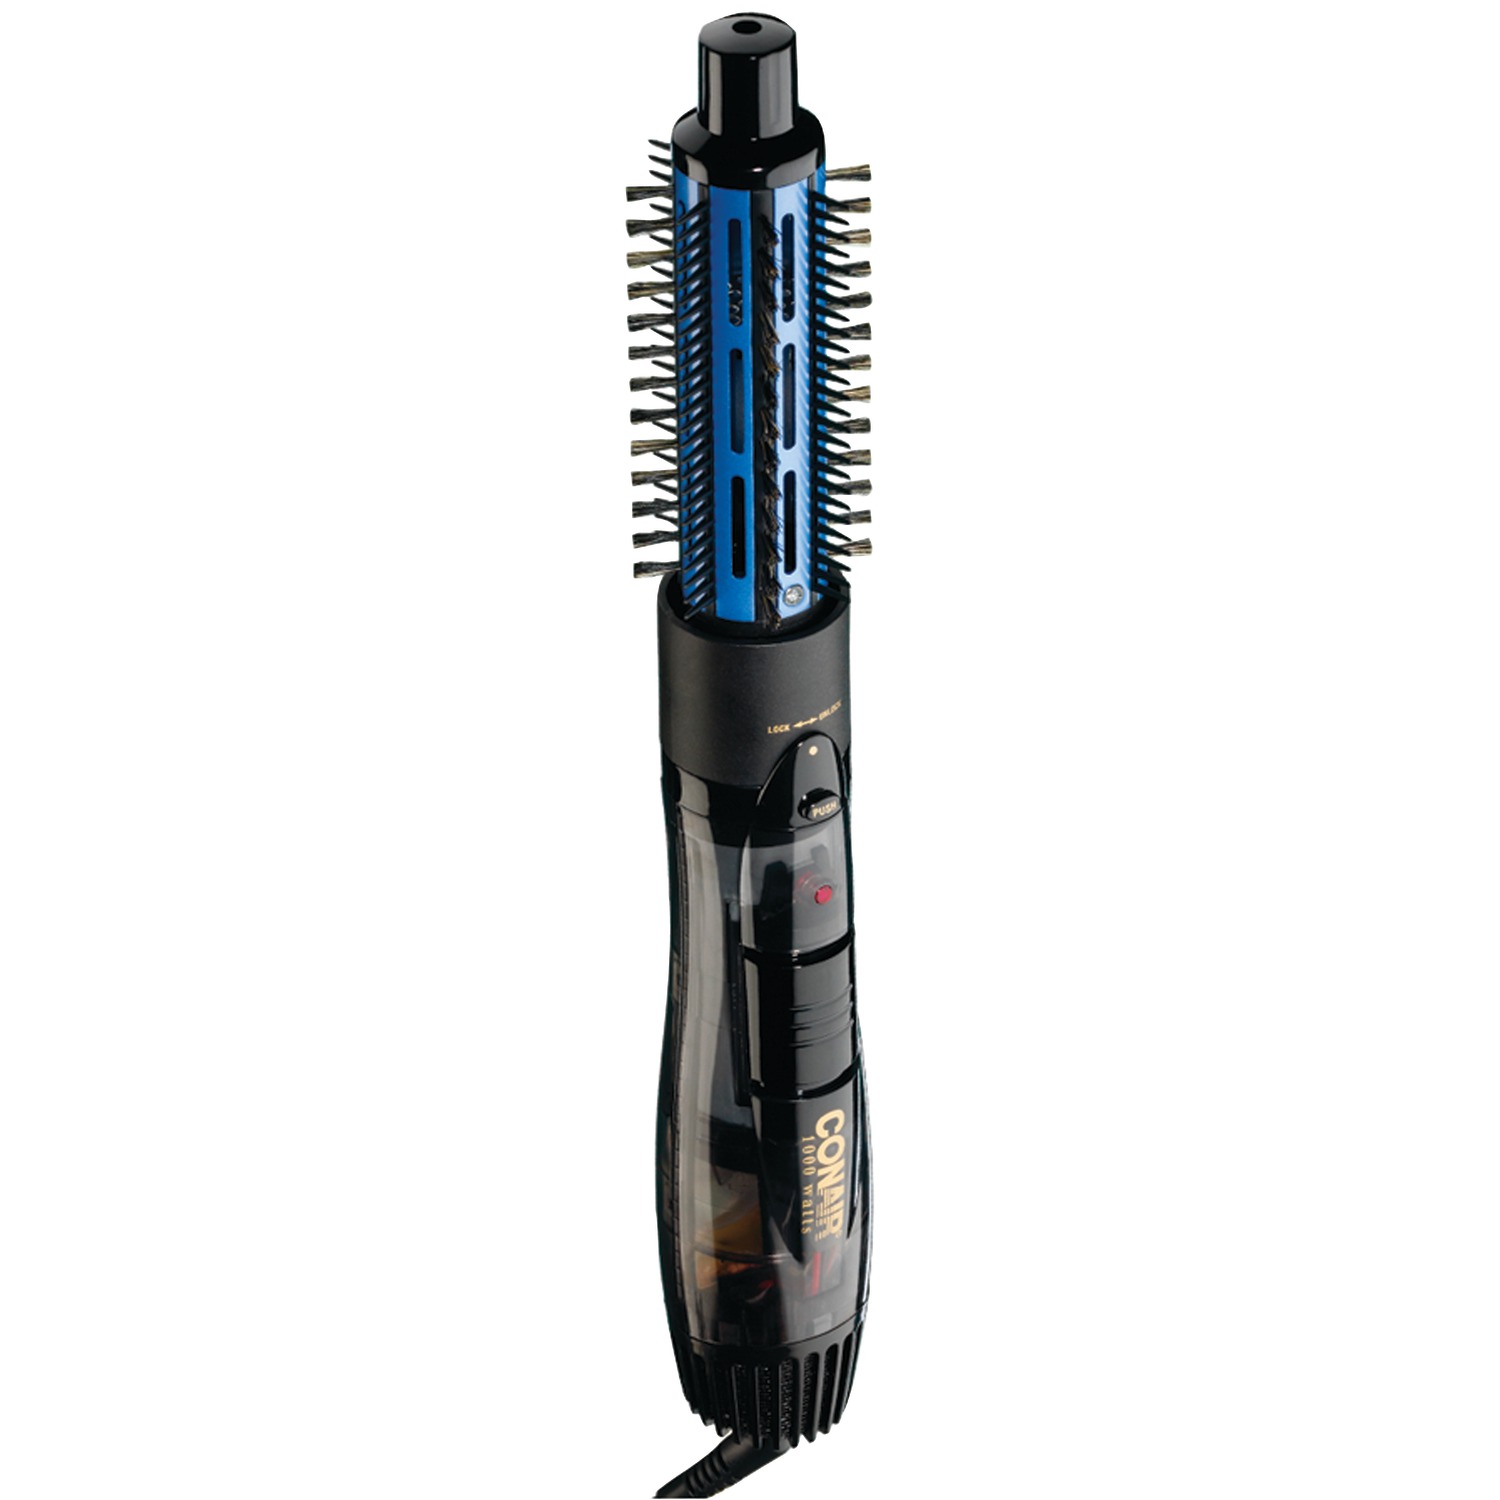 InfinitiPro by Conair Spin Air Rotating Styler/Hot Air Brush, 2-inch, Black BC178 - image 3 of 3